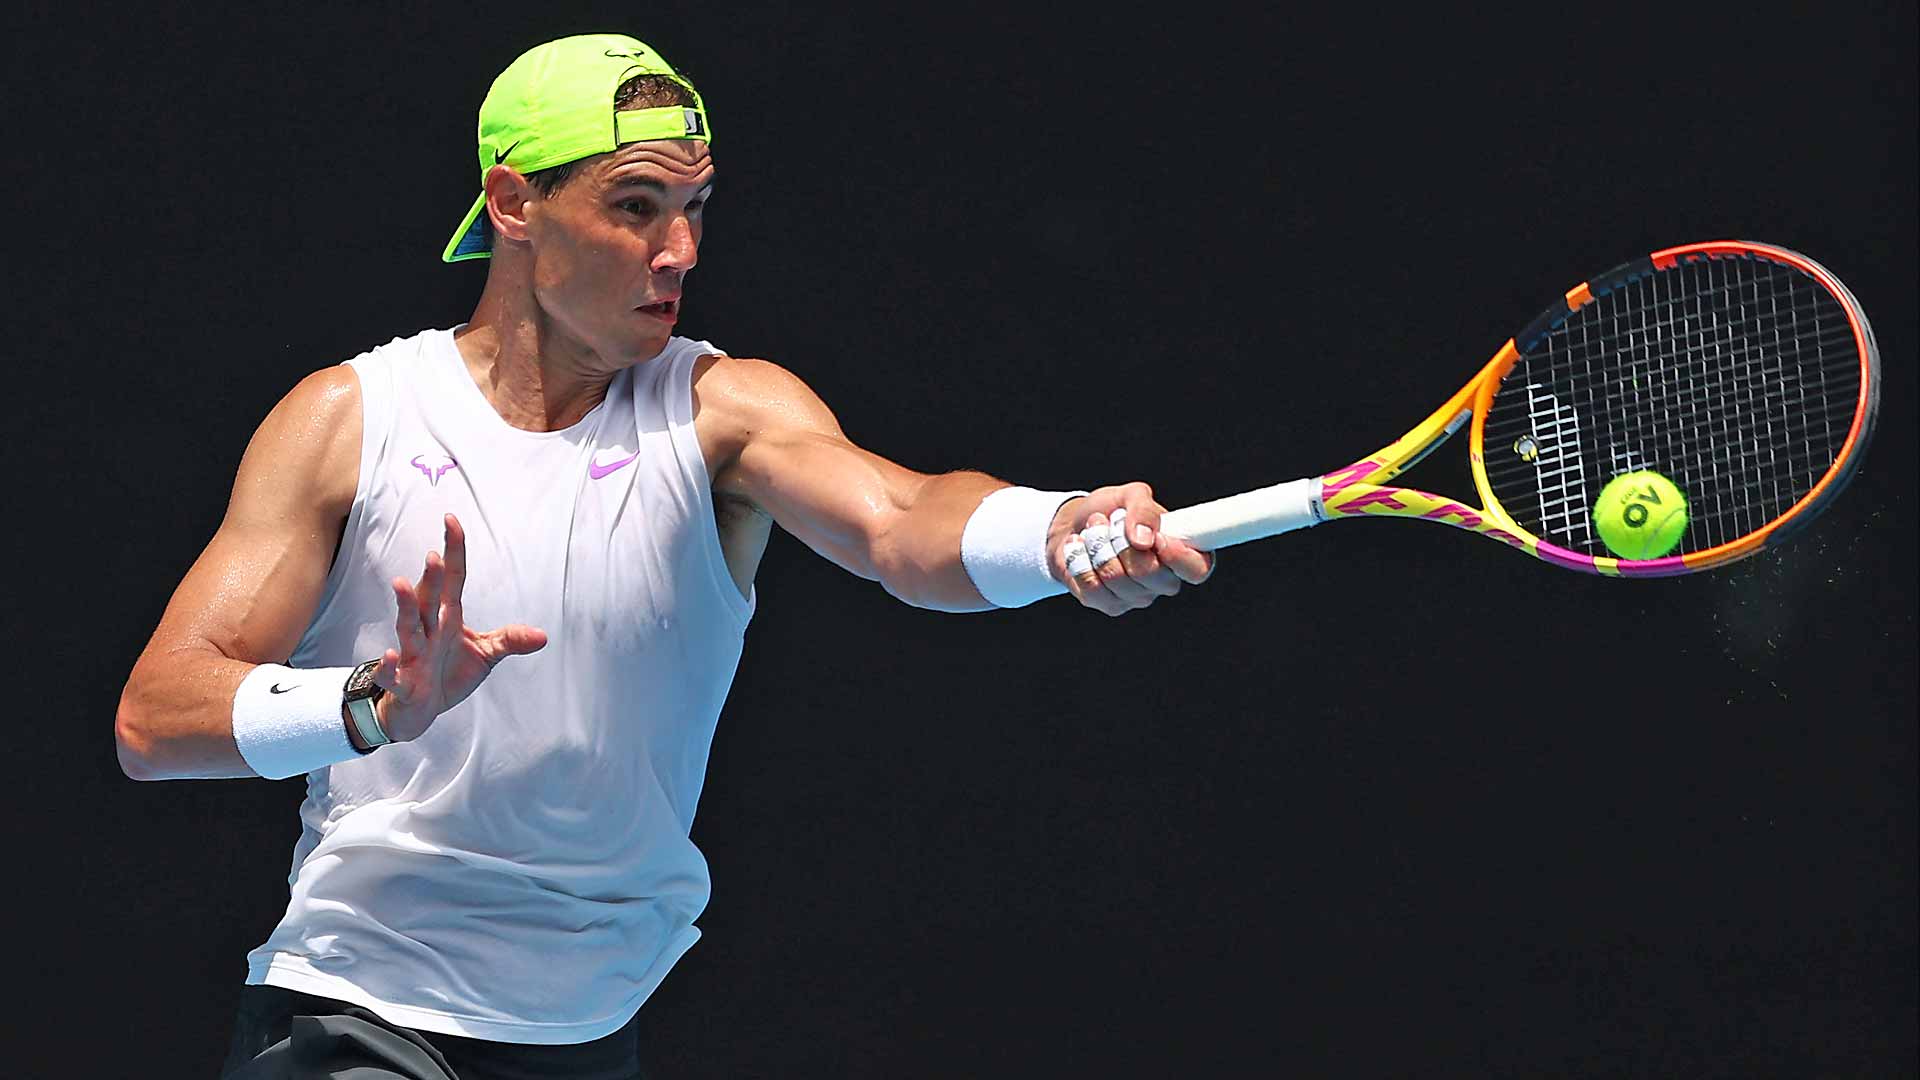 Rafael Nadal is the defending champion at the Australian Open.